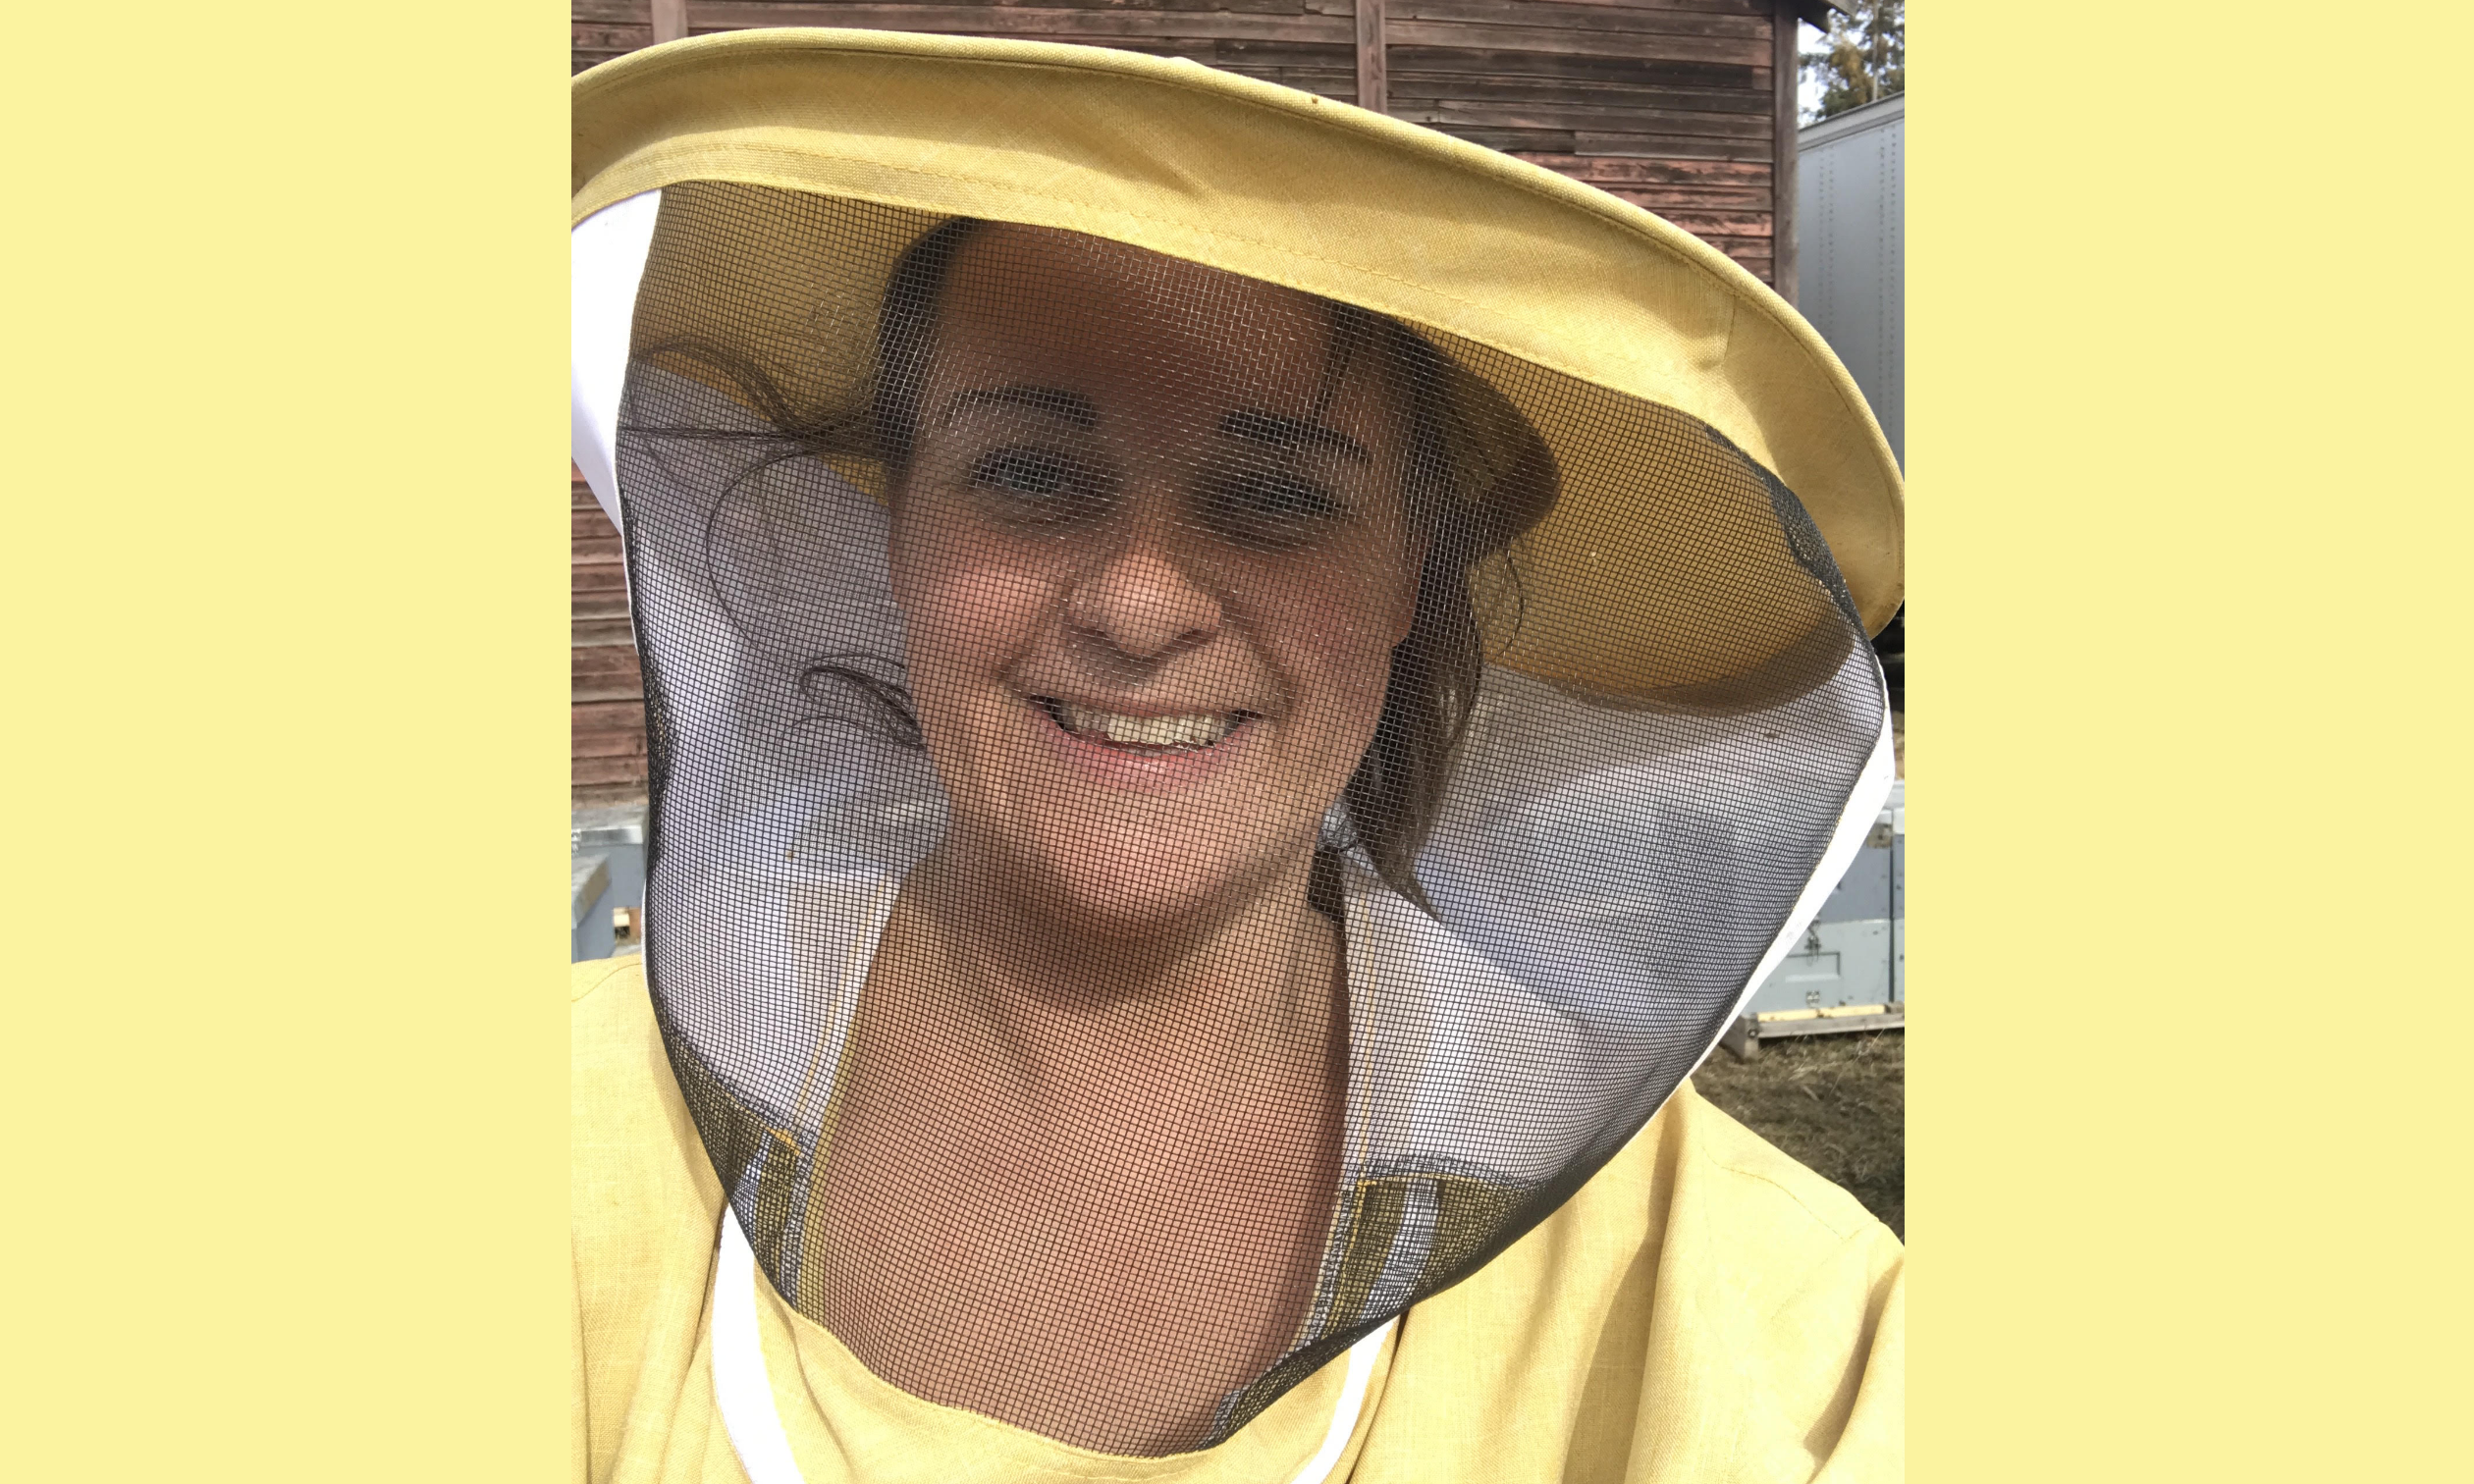 Deirdre Howard wearing a yellow beekeepers suit